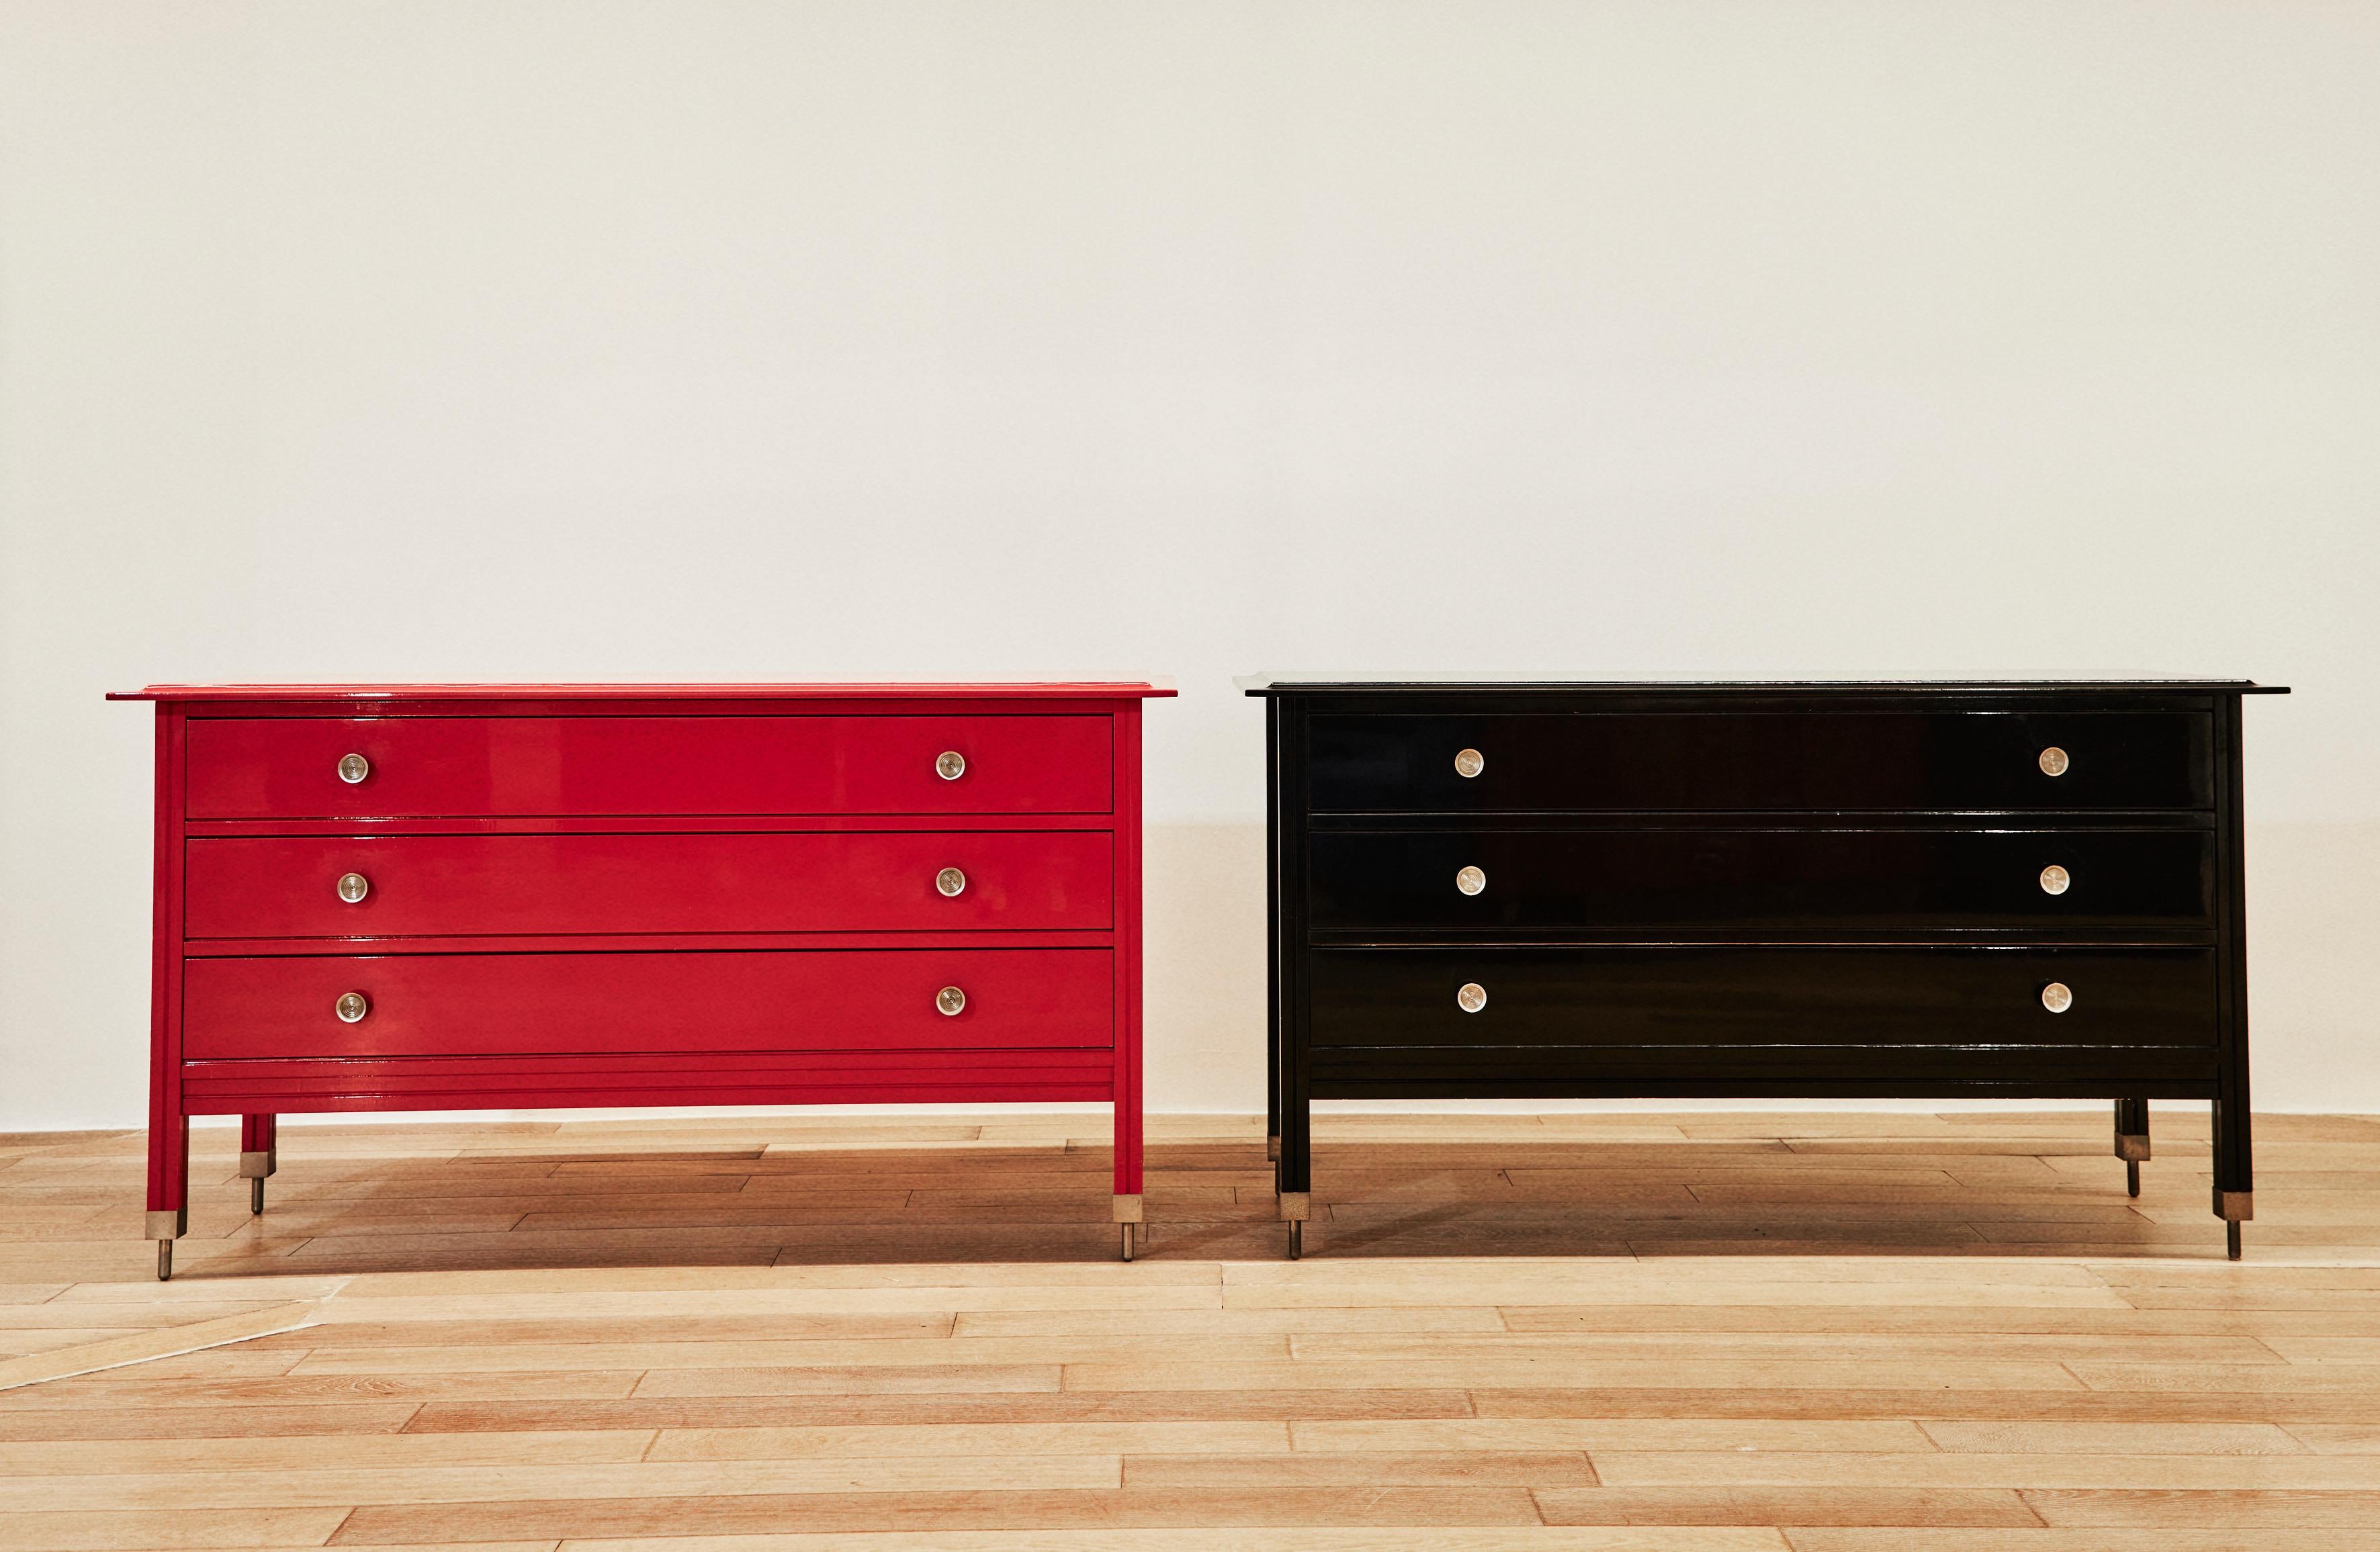 Pair of lacquered wood chests of drawers model D154-L designed in 1967 by Carlo De Carli and produced by Sormani. Black cabinet lacquer in good condition, with micro surface scratches due to wear and tear. Red lacquered dresser in better condition